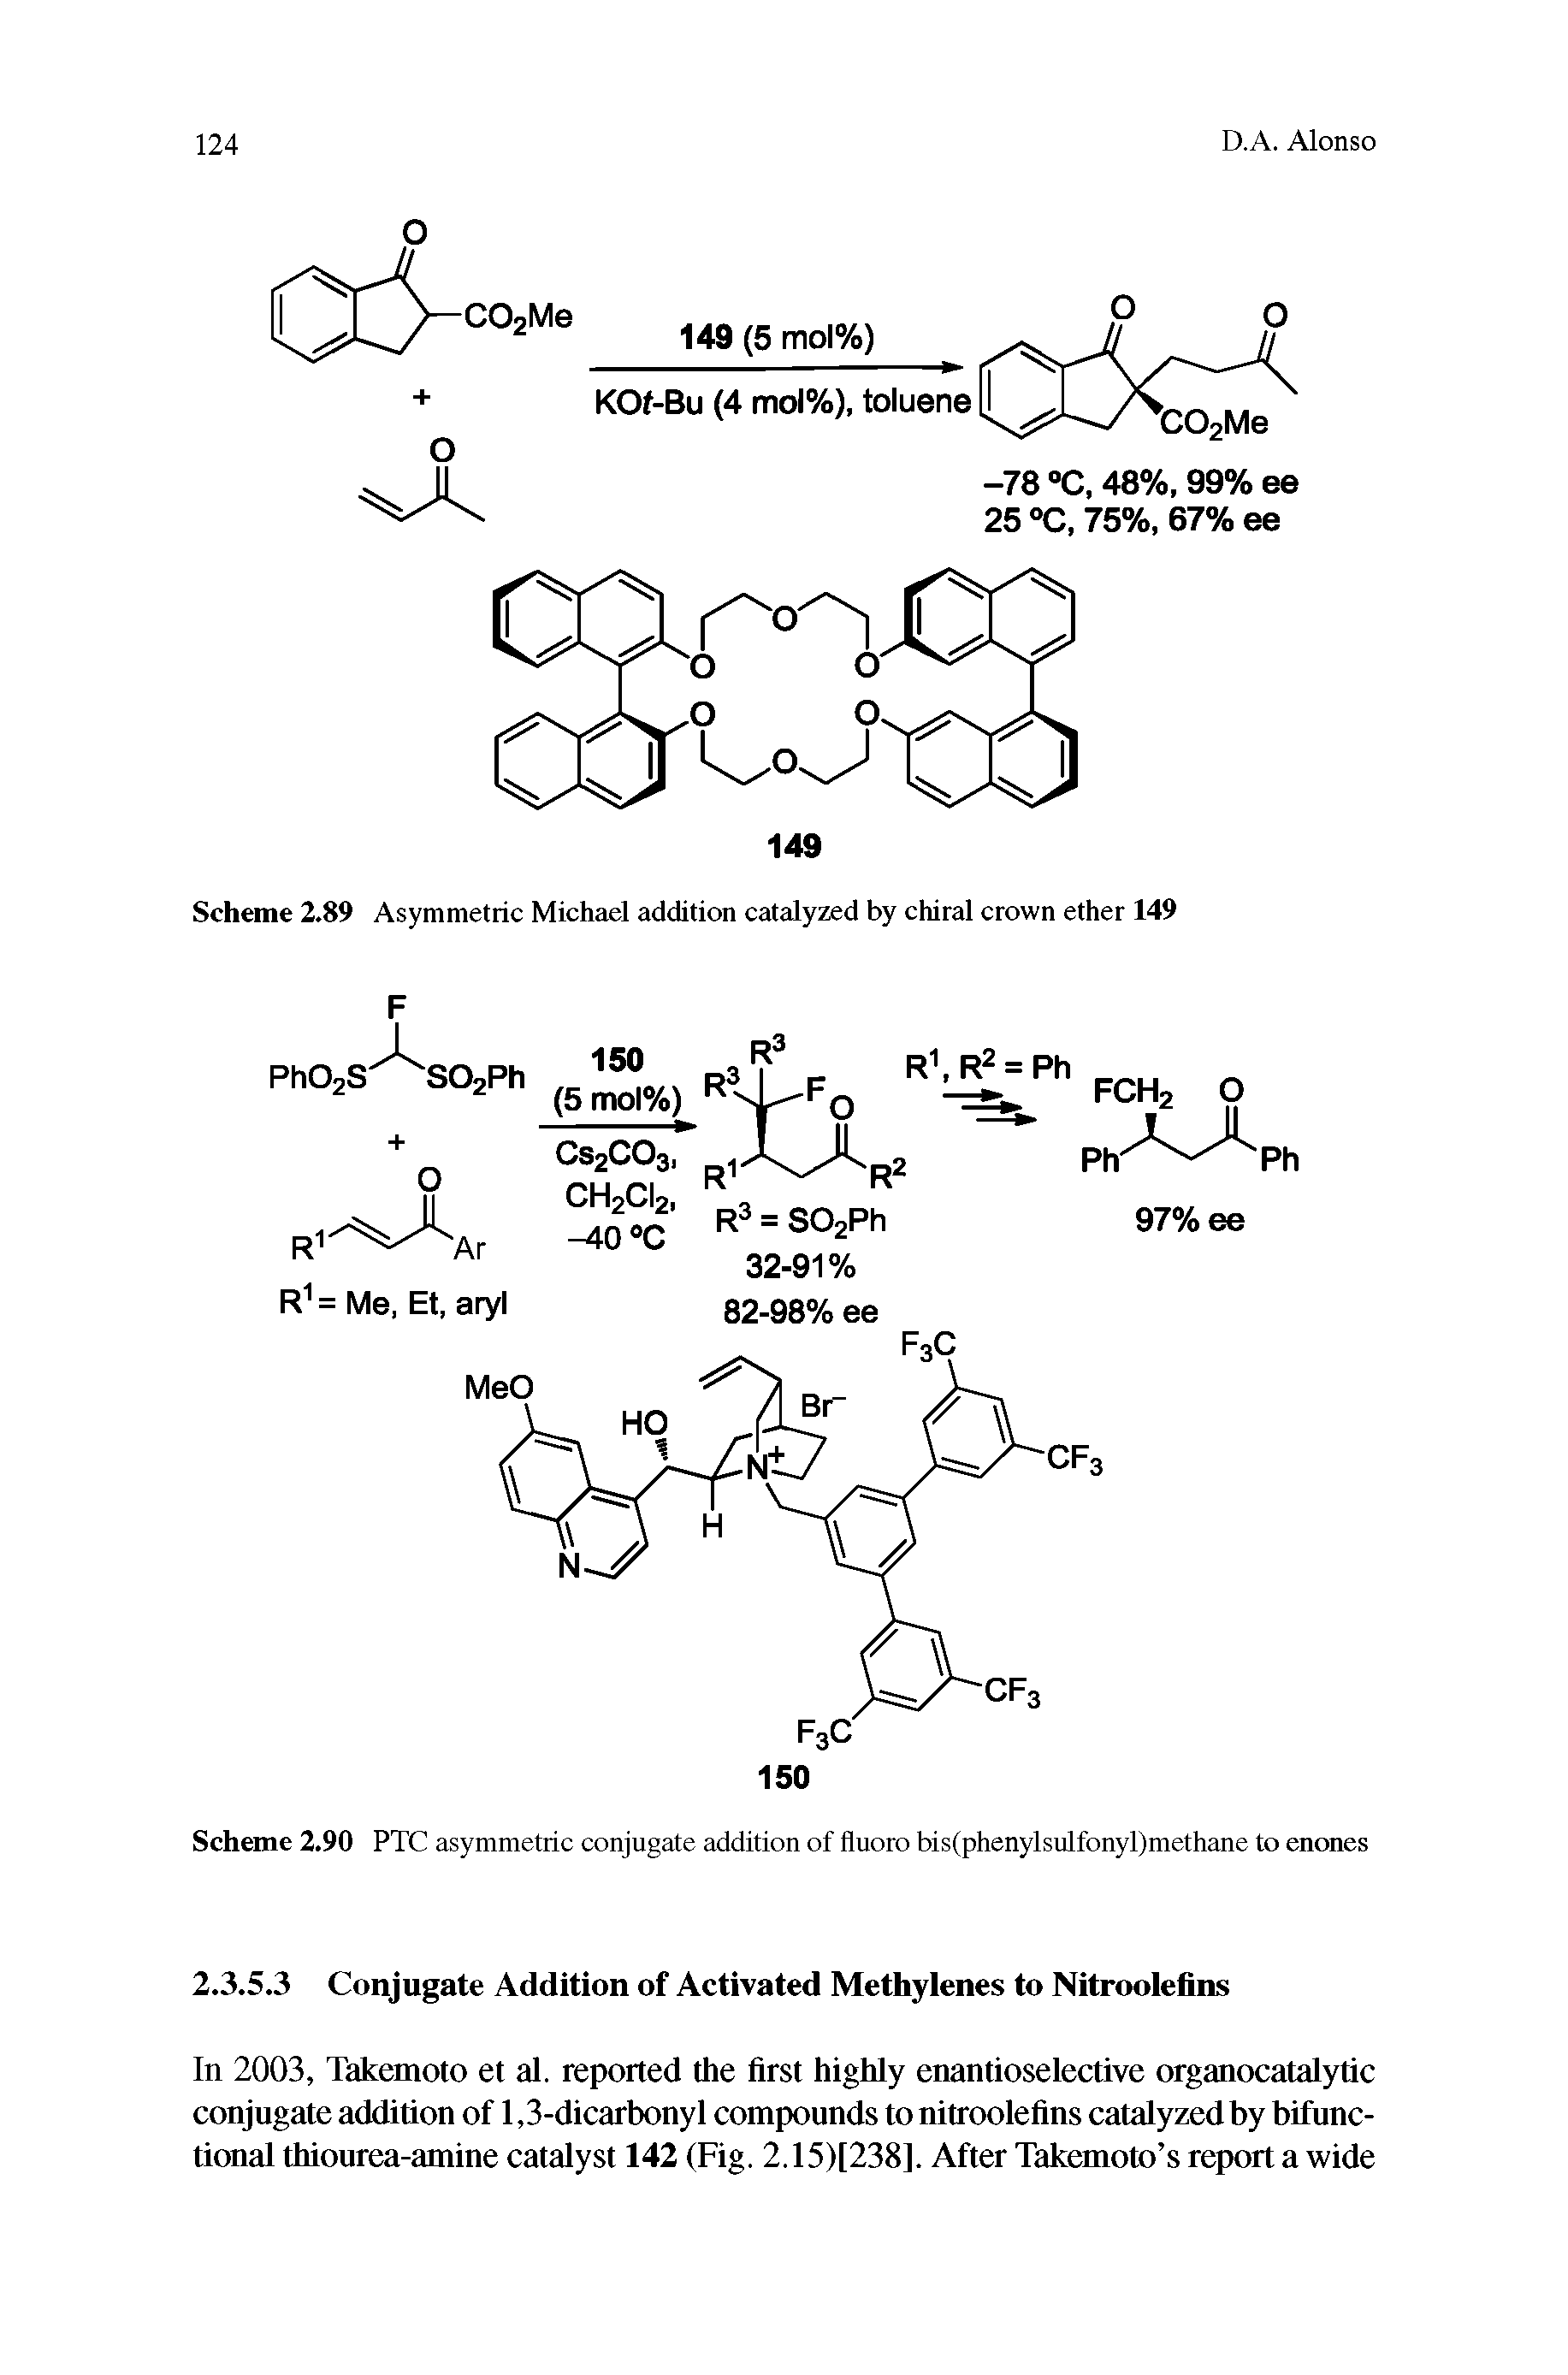 Scheme 2.89 Asymmetric Michael addition catalyzed by chiral crown ether 149...